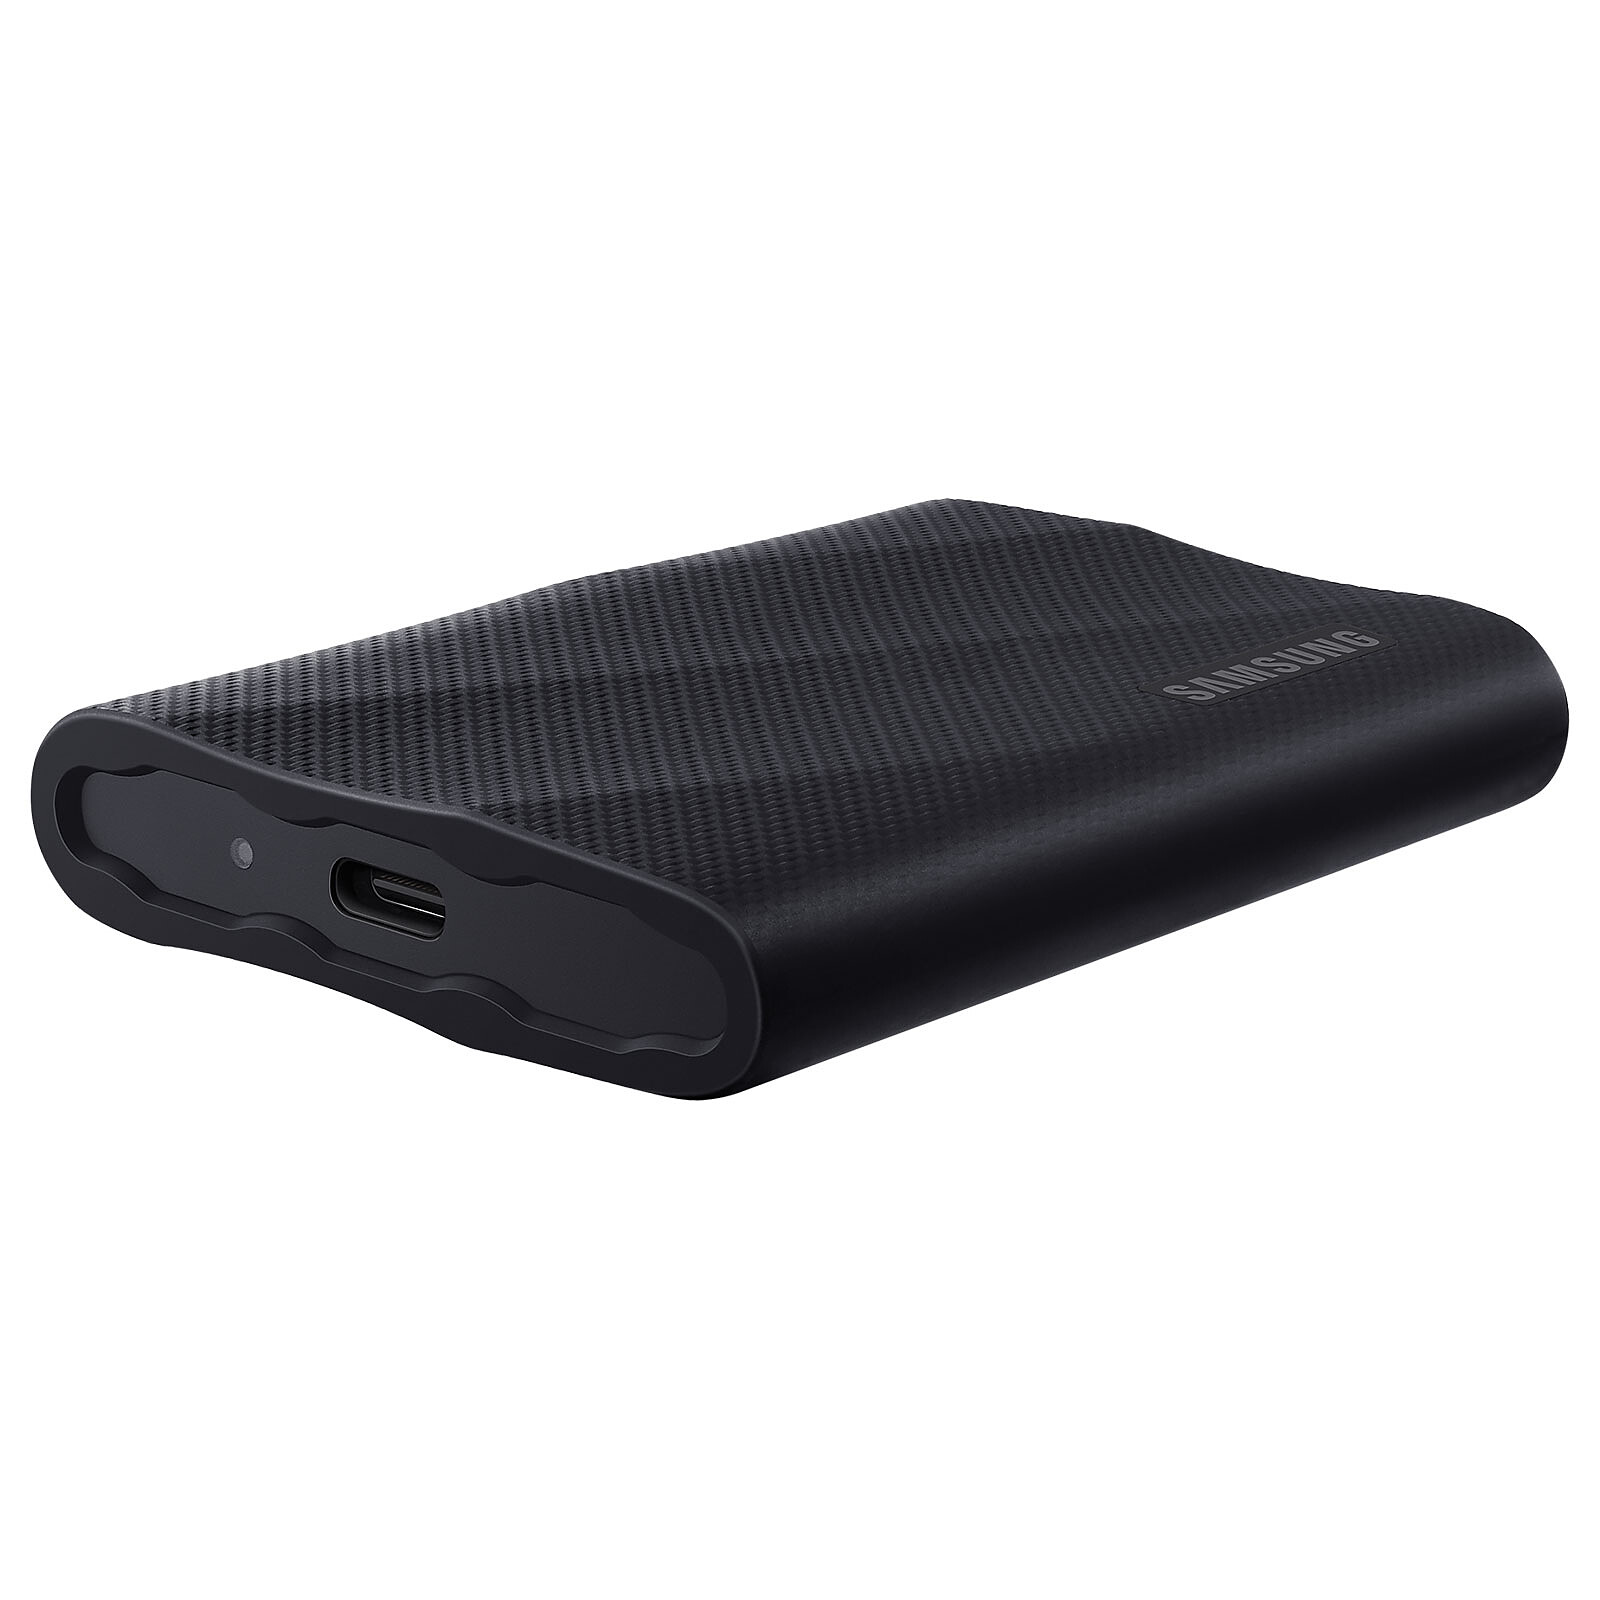 SanDisk Extreme Portable SSD V2 2 To - Disque dur externe - LDLC